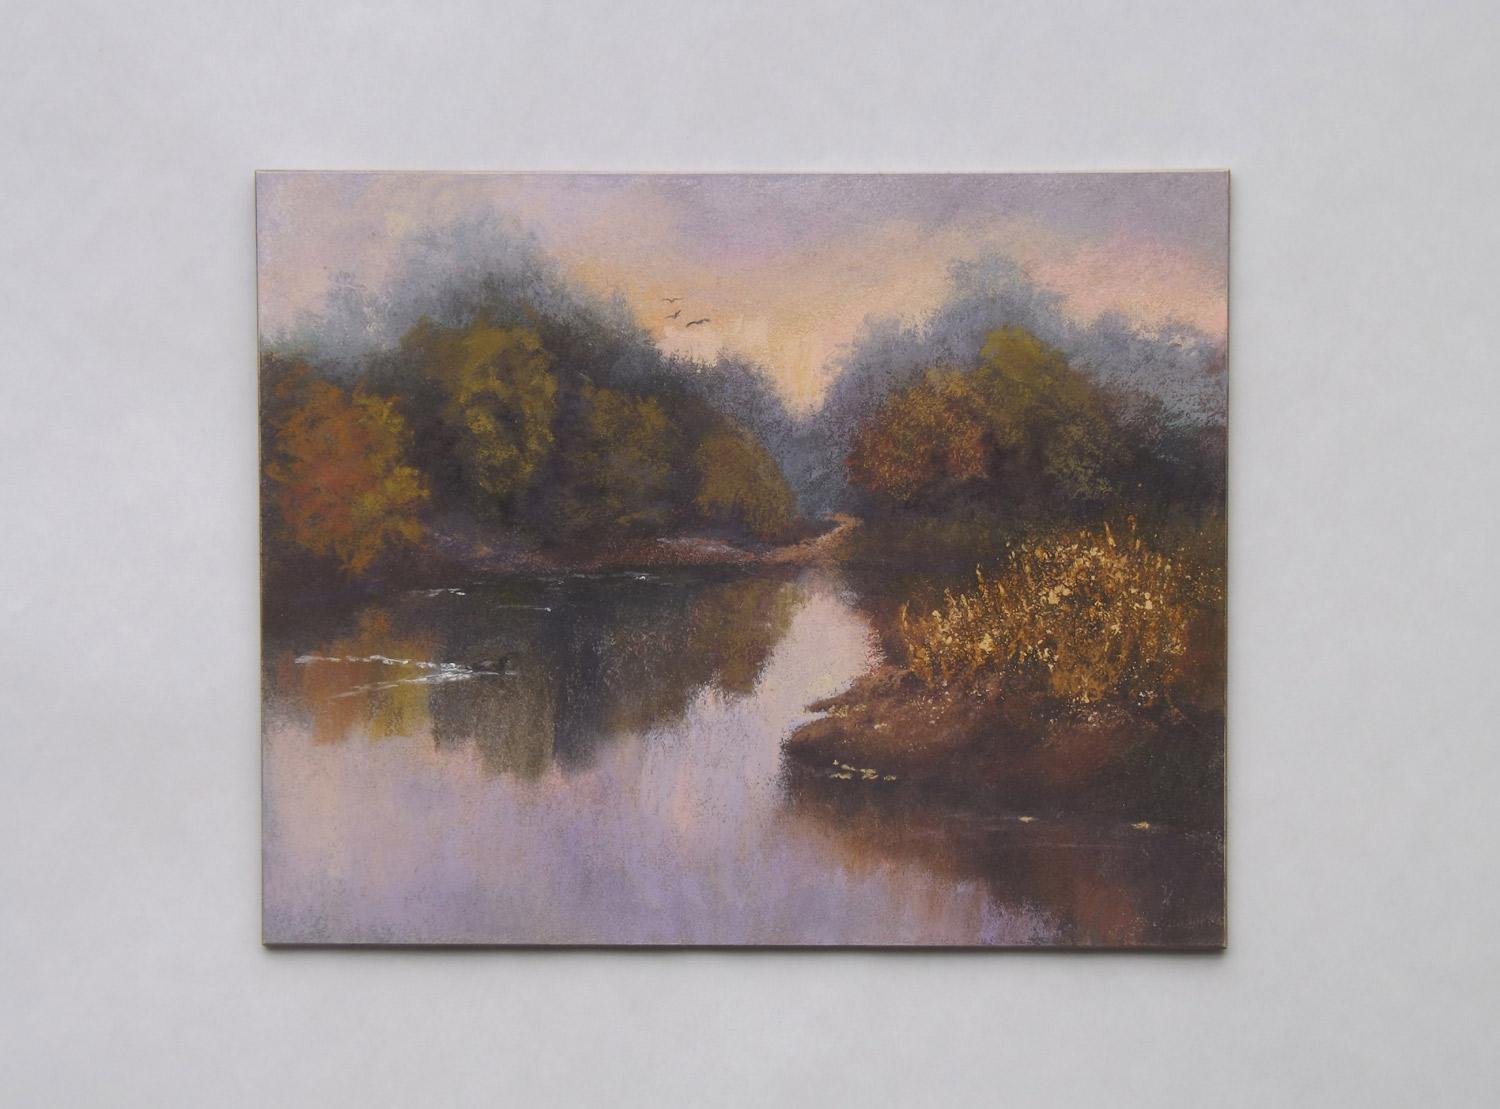 <p>Artist Comments<br />This is my interpretation of a section of the American River near my home. I tried to convey the feeling of peace that I get when walking in this area with the ducks and birds for company. I added the path for a little sense